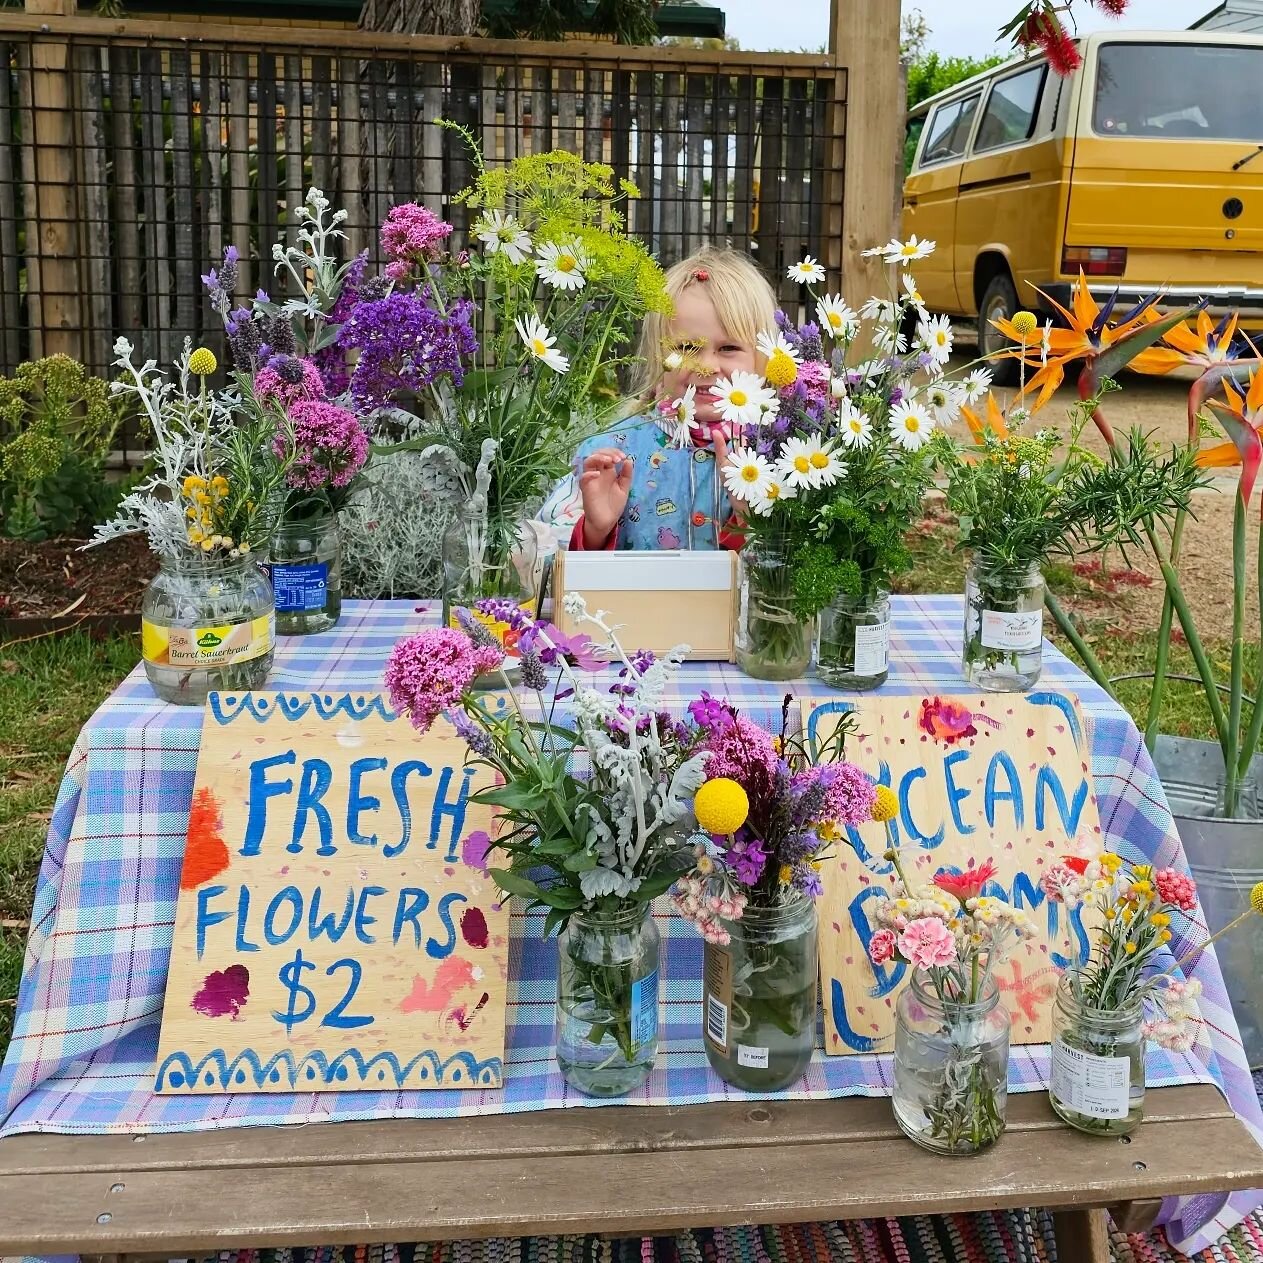 The sweetest day from a few months back when Elkie set up a flower stall for aallll the neighbors in our street. 🌸🌷🌈 Since moving down south it has been our family goal to set up a road side stall. Hoping stone fruit for the next one. A sell out m